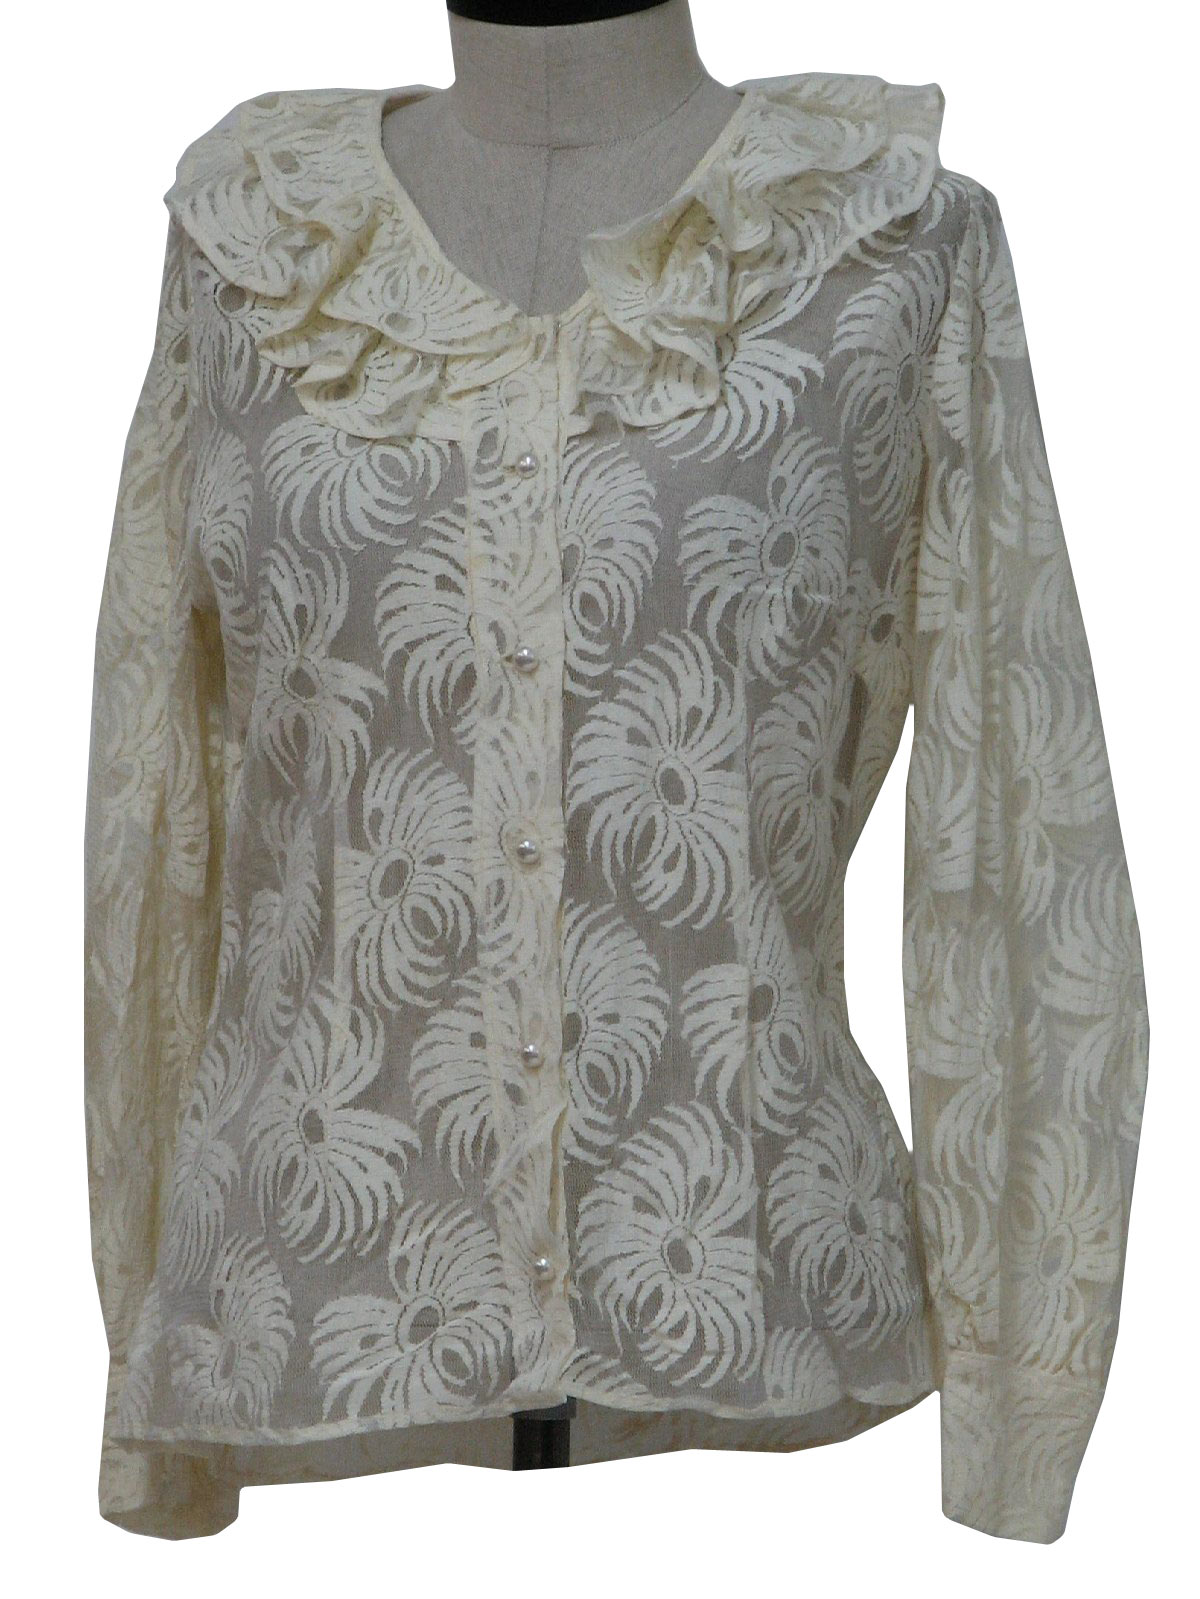 60s Vintage Shirt: 60s -no label- Womens ivory polyester blend